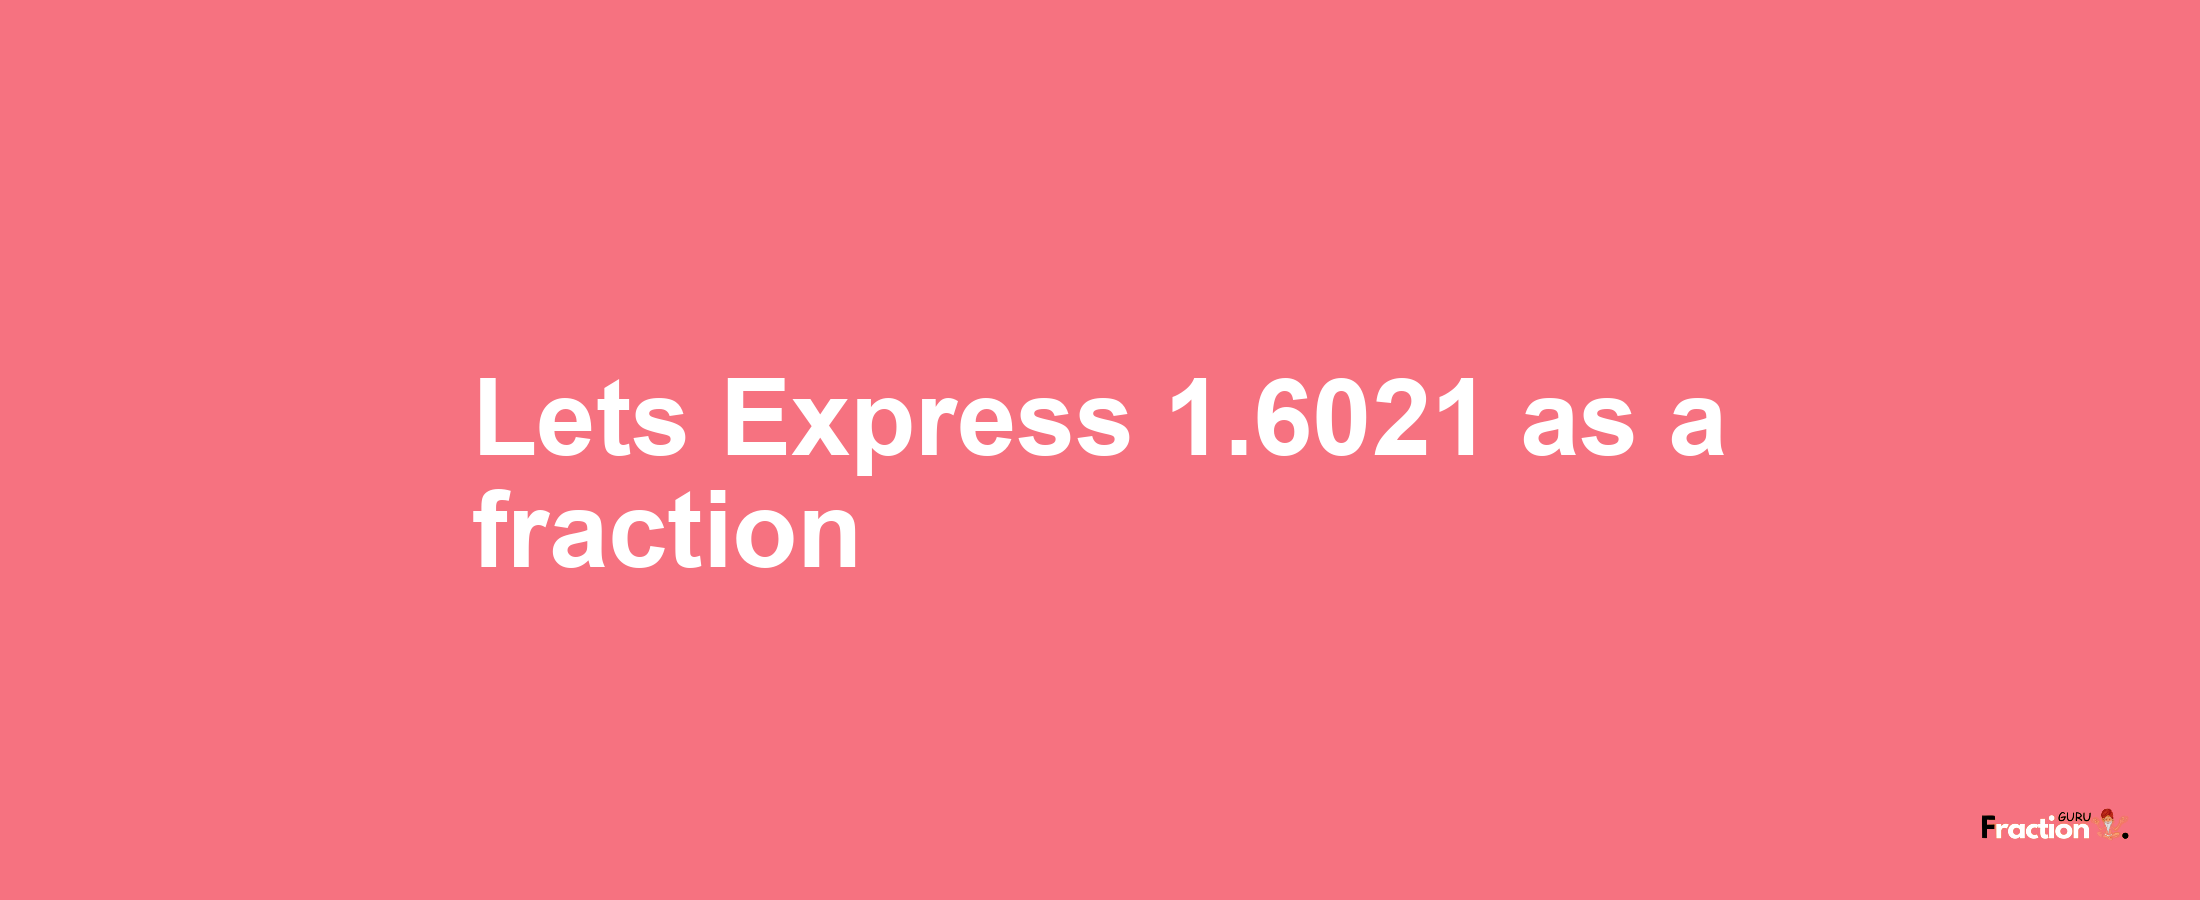 Lets Express 1.6021 as afraction